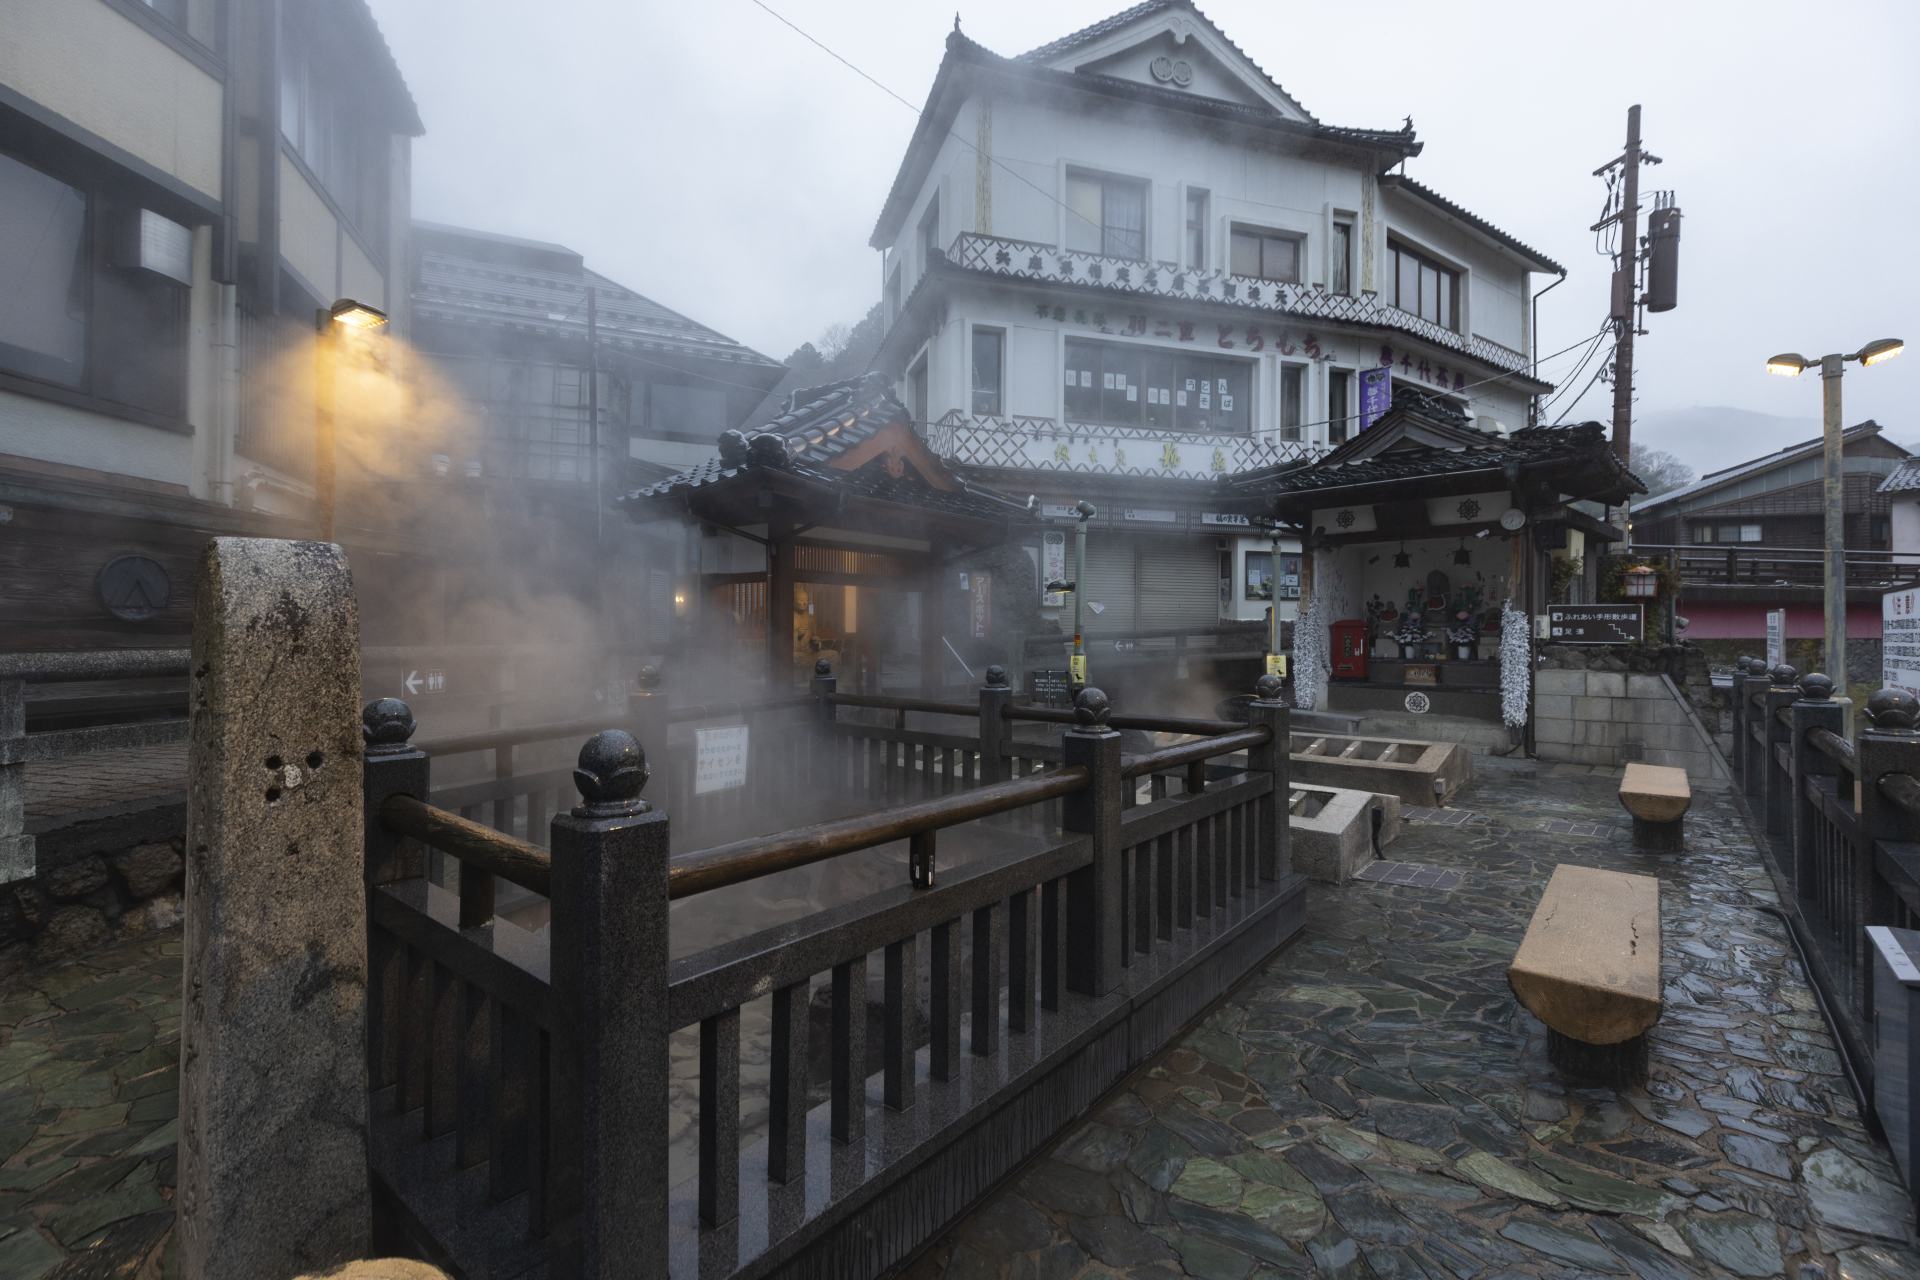 The onsen town always has a misty look thanks to the steam.